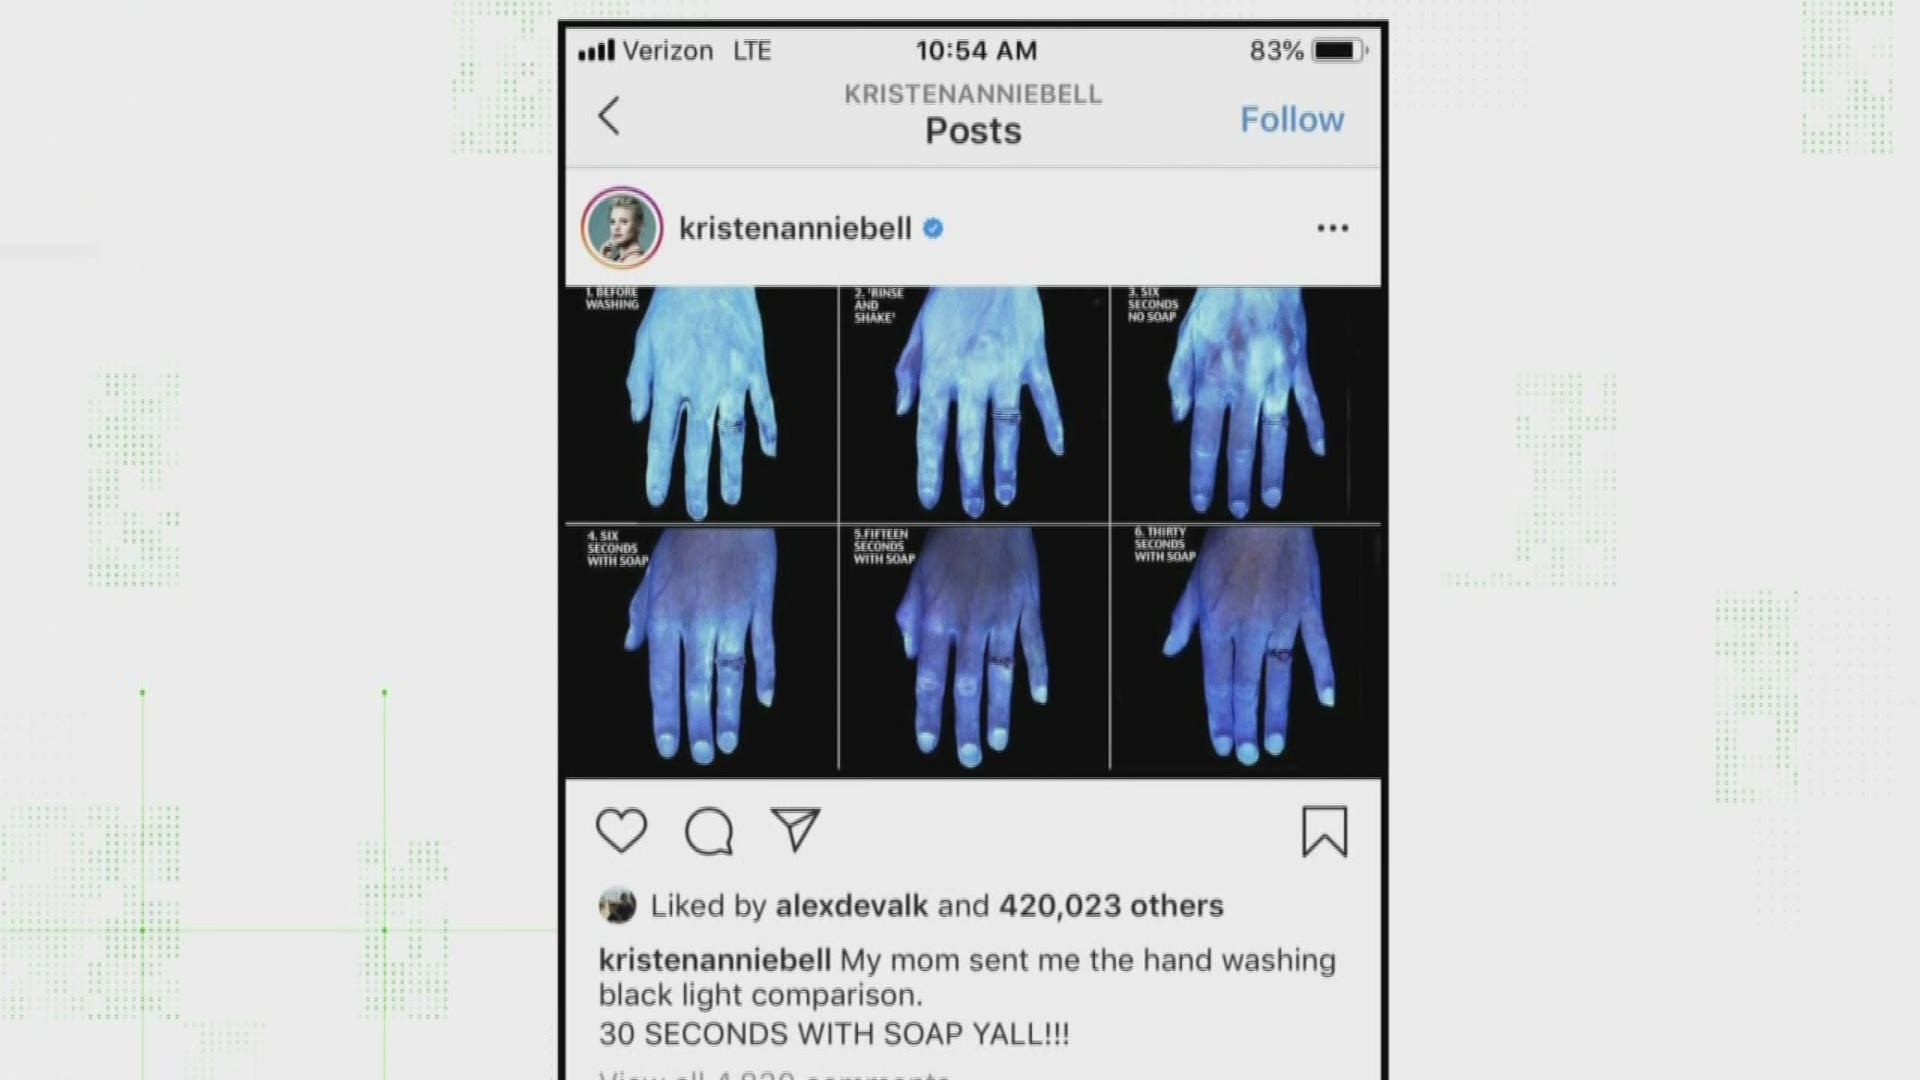 You may have seen it on Facebook or Instagram: A comparison of hands under UV light, showing the effectiveness of washing your hands for different lengths of time.